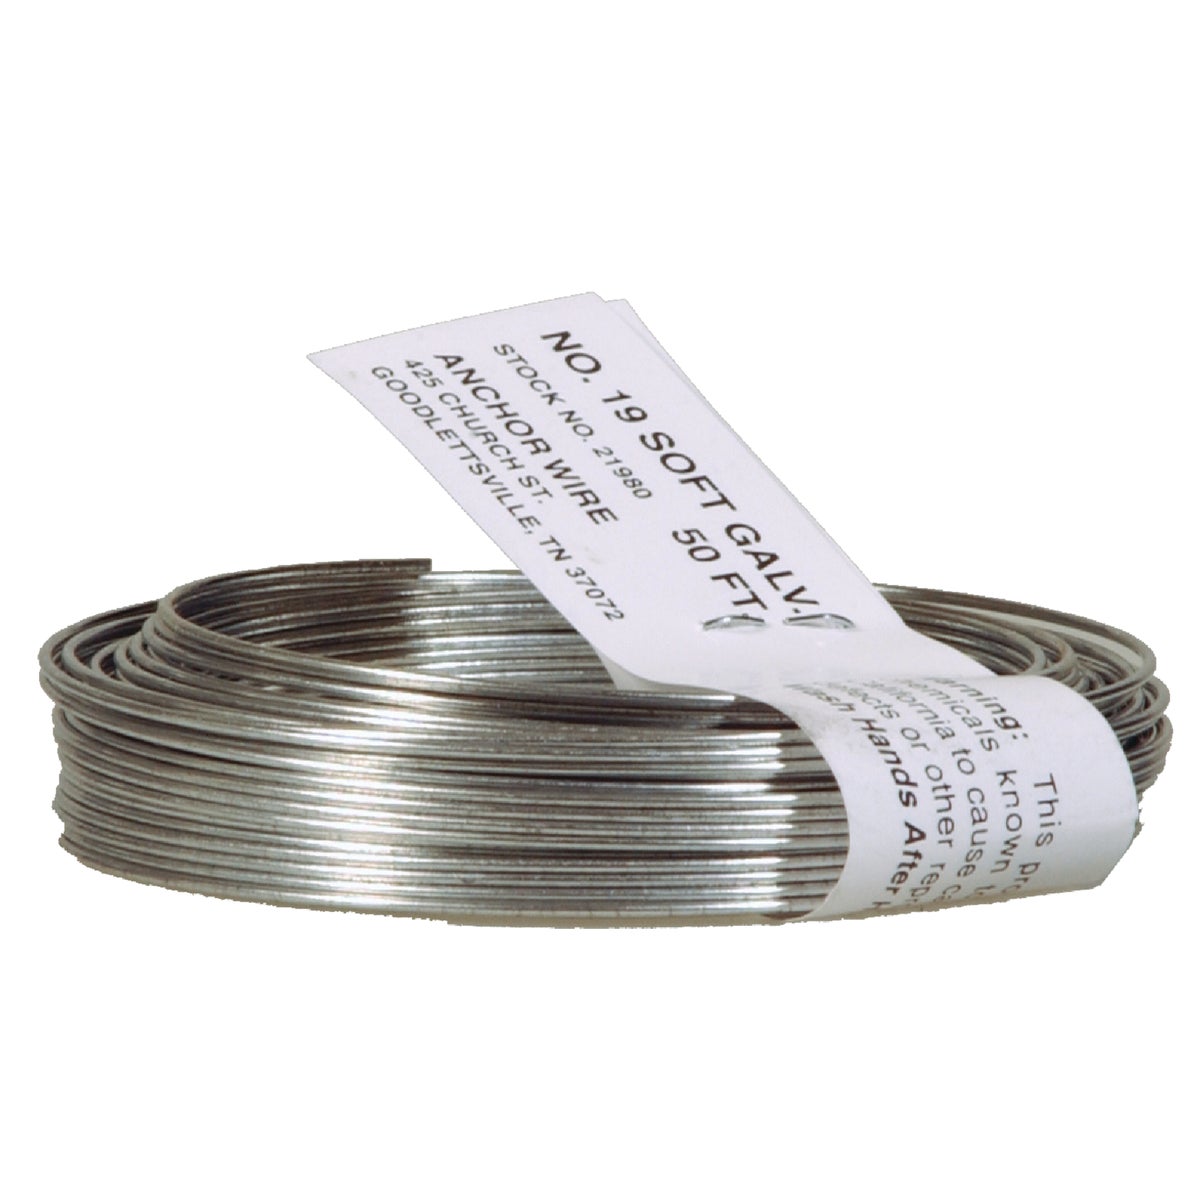 Hillman Anchor Wire 50 Ft. 19 Ga. Galvanized Steel Mechanics and Stovepipe General Purpose Wire, Coil